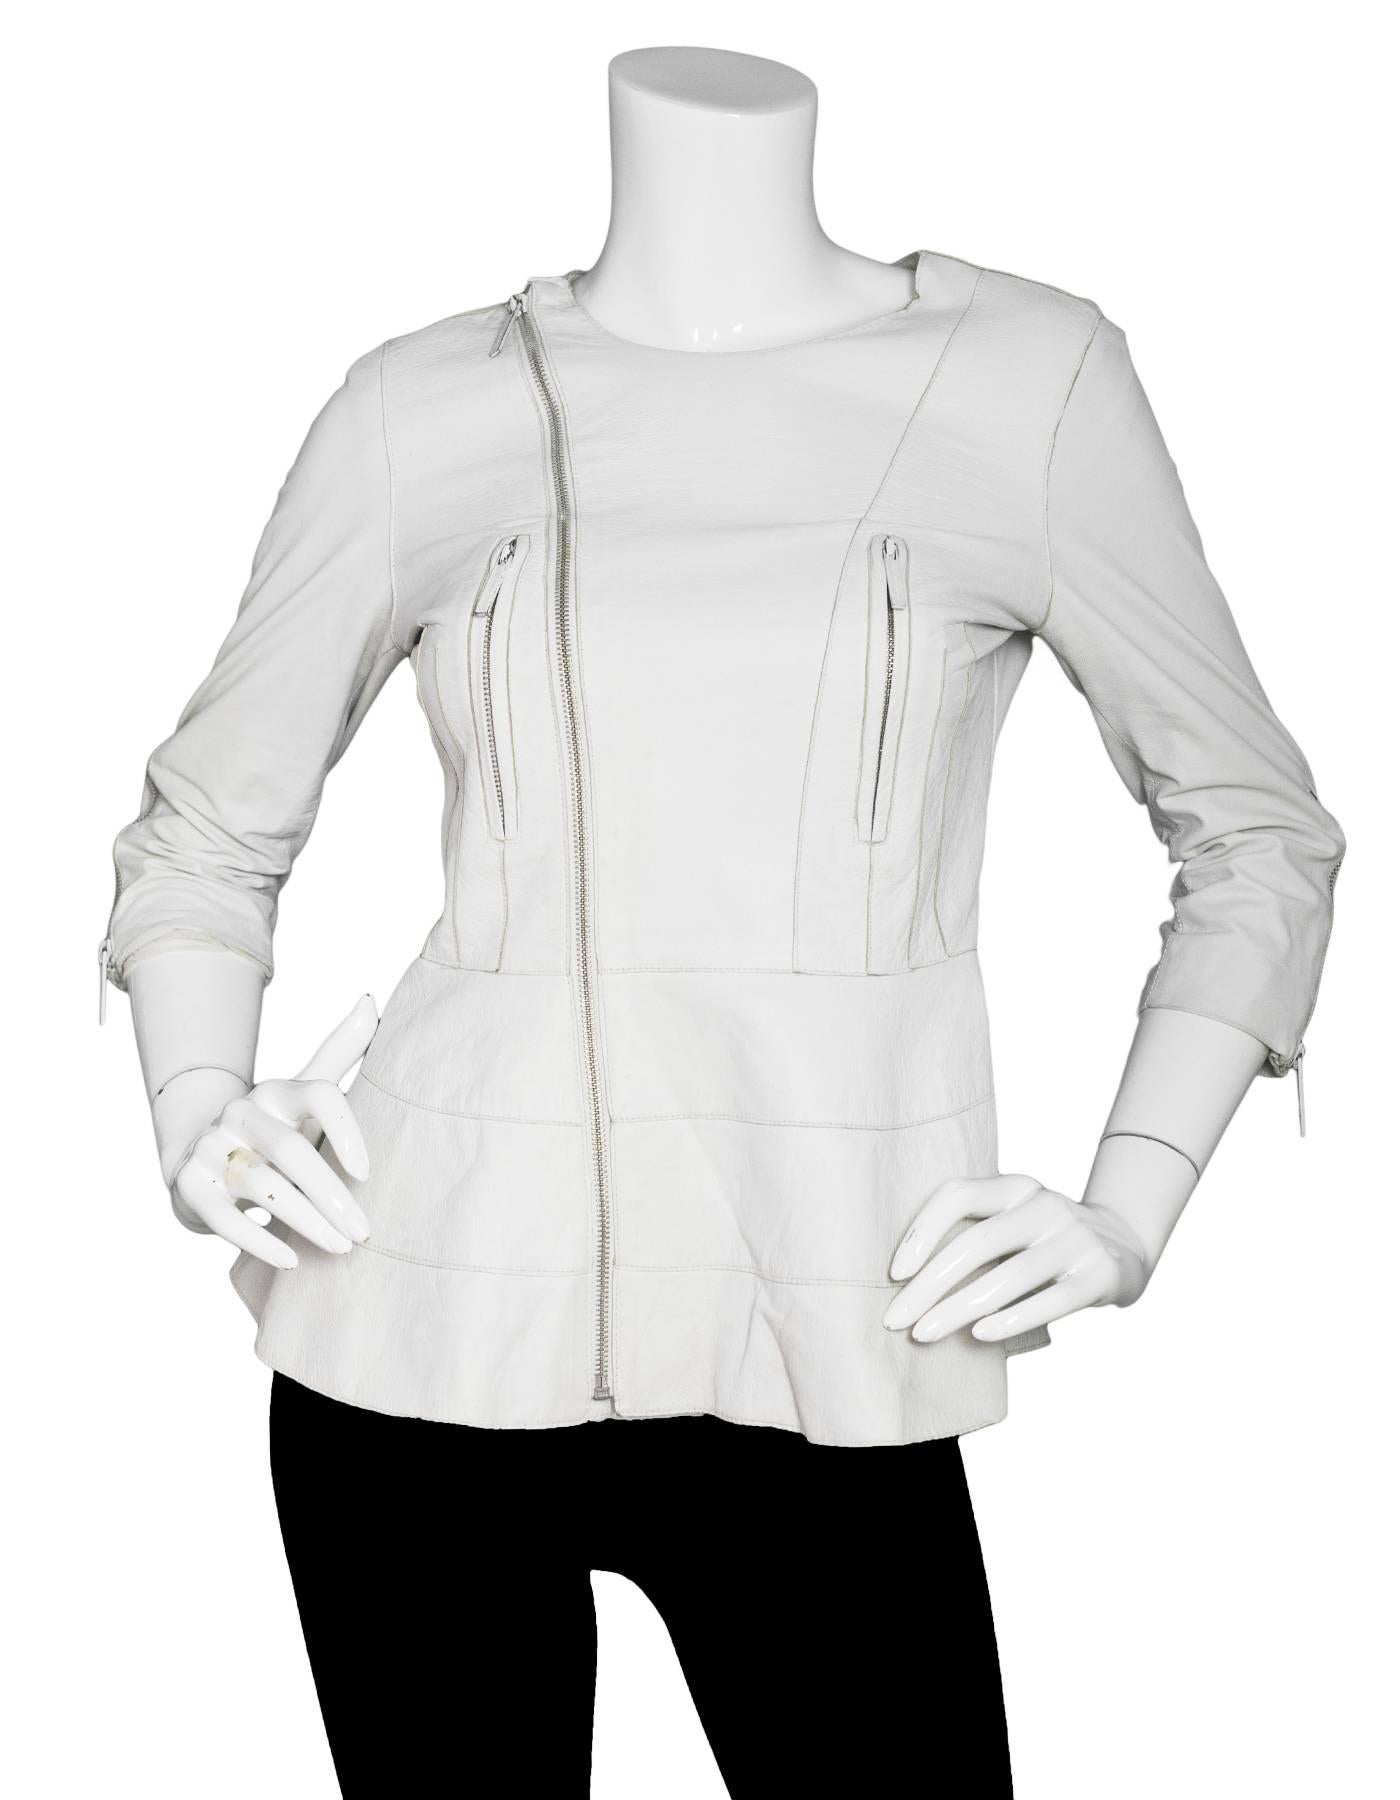 Catherine Malandrino White Leather Moto Jacket Sz 2

Made In: China
Color: White
Composition: 100% Lamb leather
Lining: White mesh
Closure/Opening: Zip up front with snap at neck
Exterior Pockets: Two front zip pockets
Interior Pockets: none
Overall